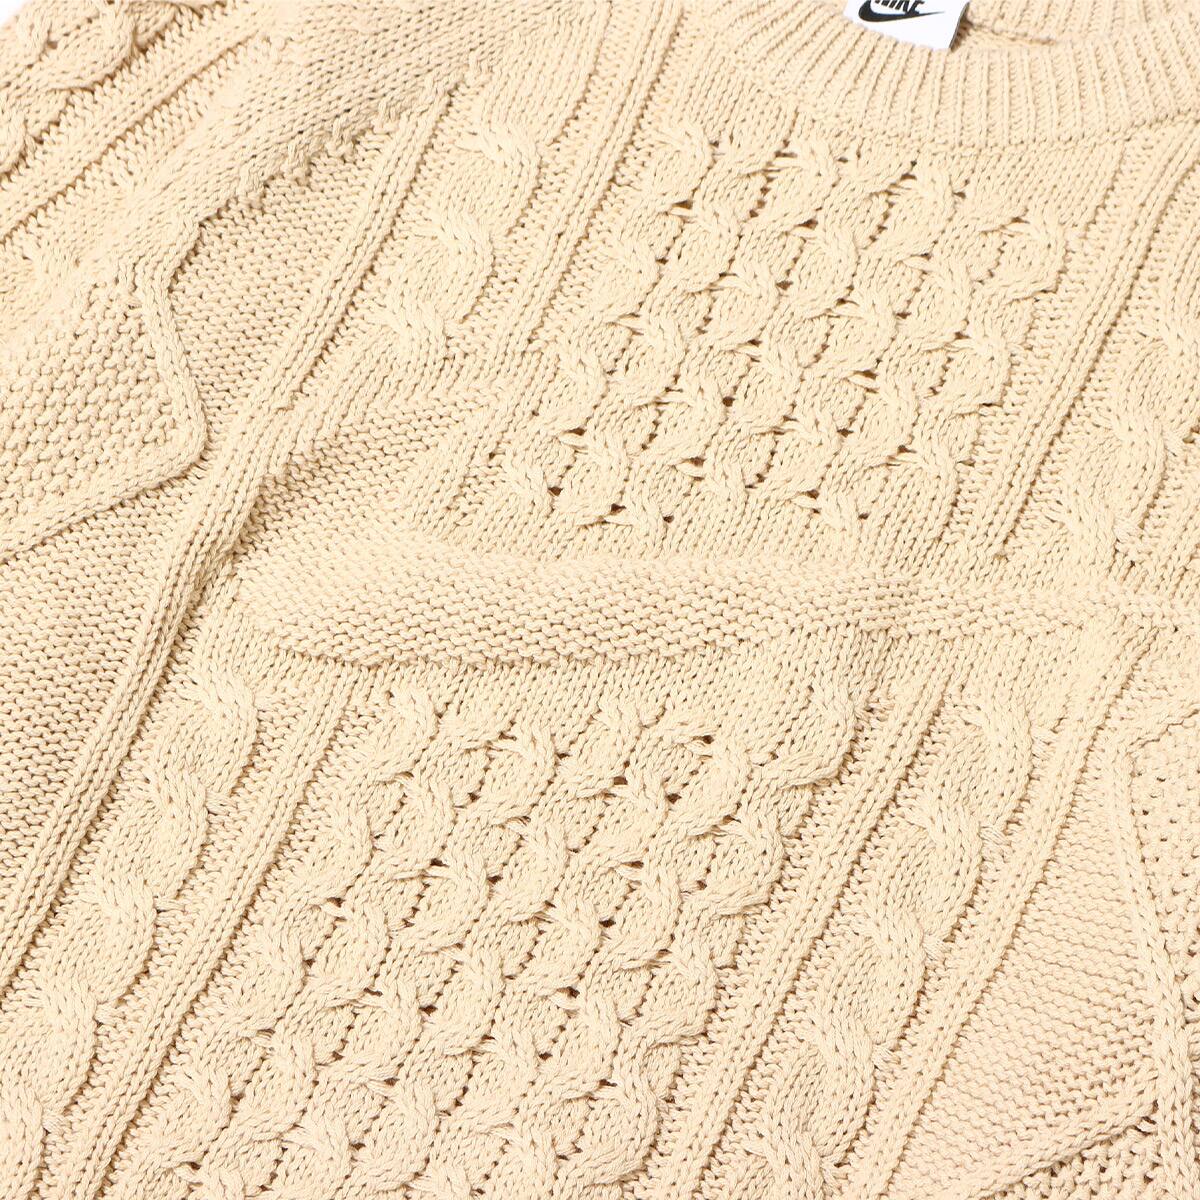 NIKE AS M NL CABLE KNIT SWEATER XLサイズ 新品 - ニット/セーター